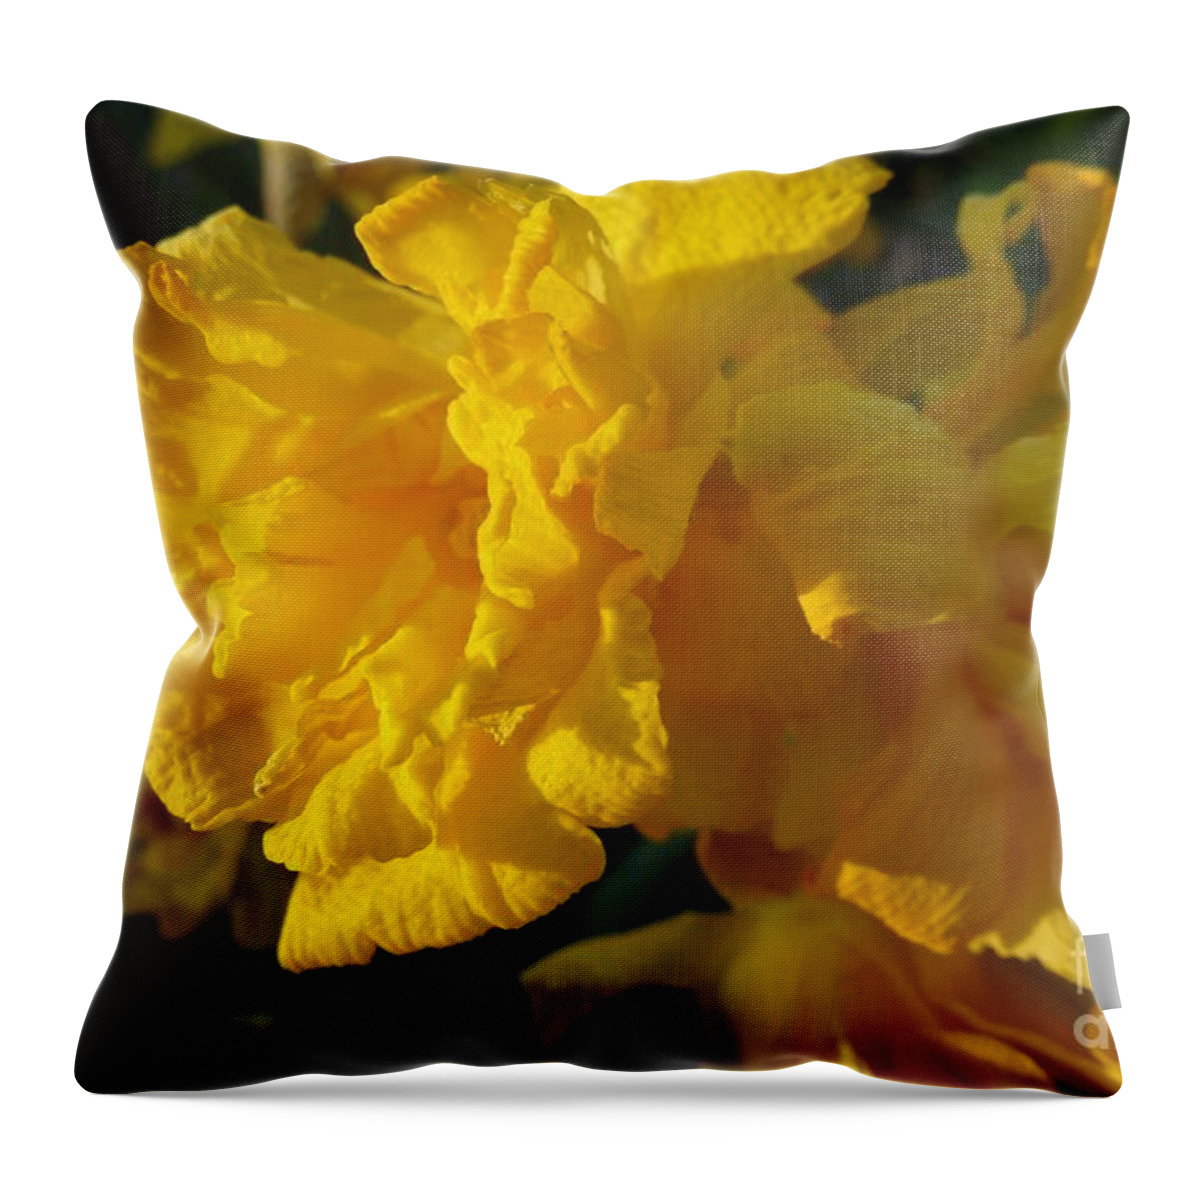 Abstract Throw Pillow featuring the photograph Yellow Daffodils by Jean Bernard Roussilhe